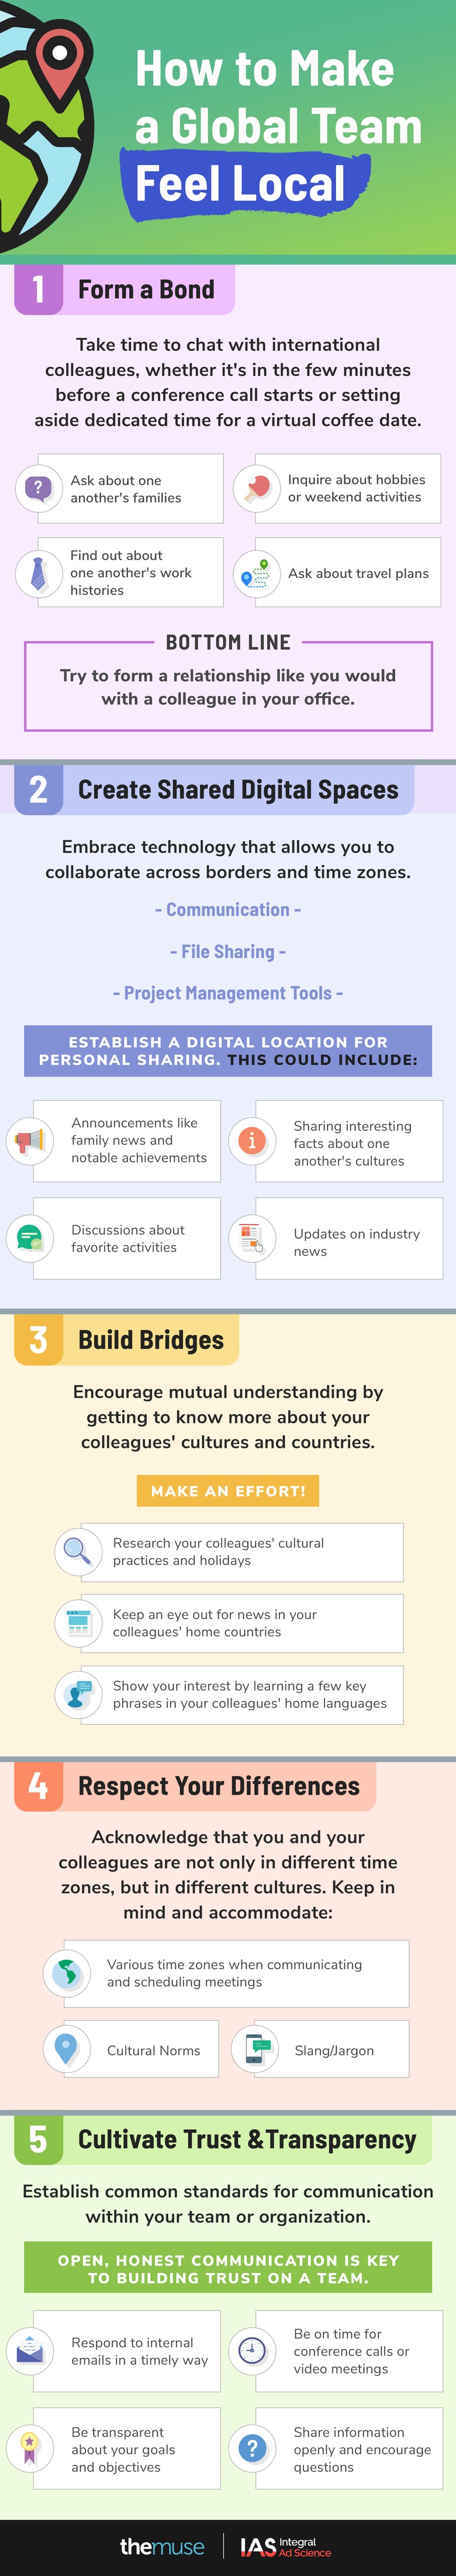 Infographic explaining 5 steps to helping a global team bond.